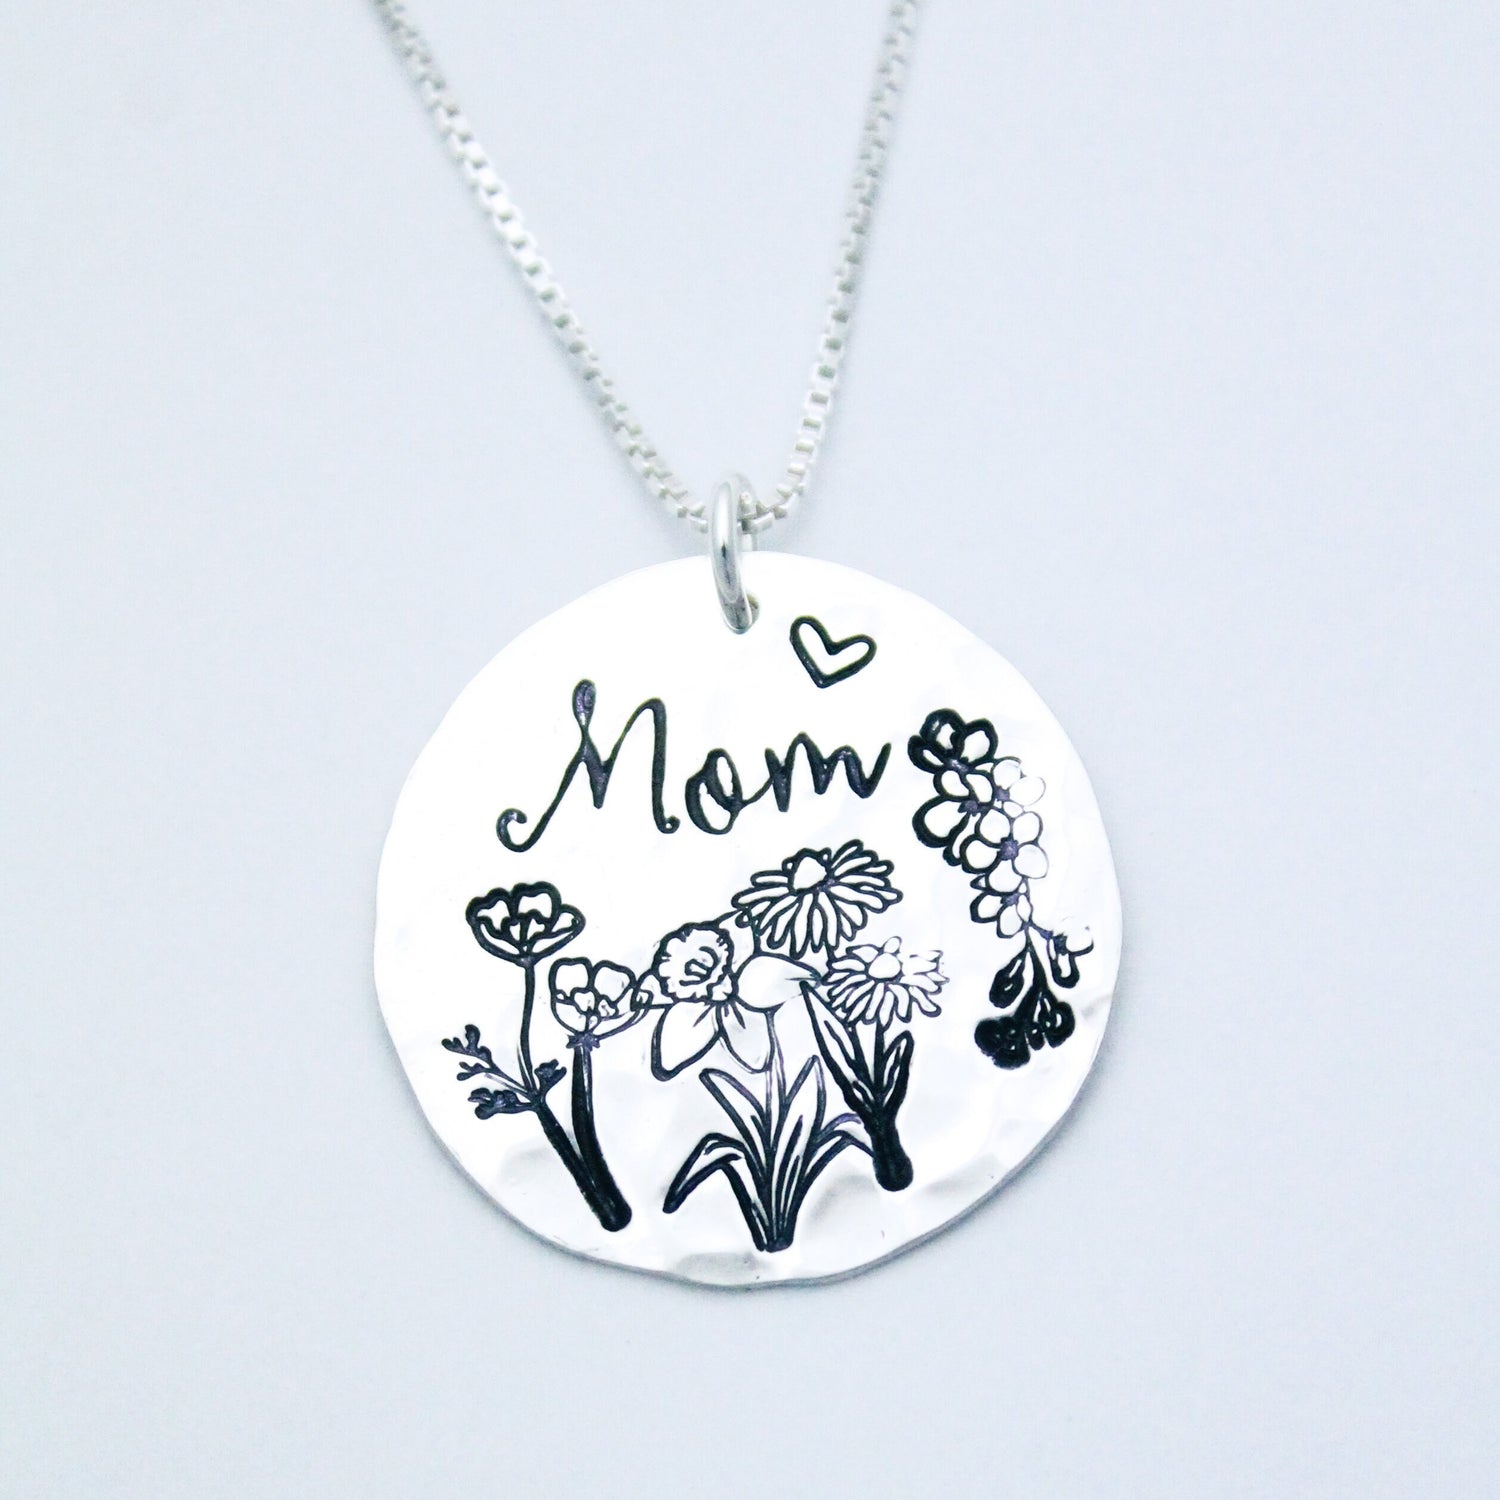 Birth Month Flower Necklace for Mom, Sterling Silver Birth Flower Garden Necklace, Birthday Gift, Flower Jewelry, Mother's Day Garden Gift